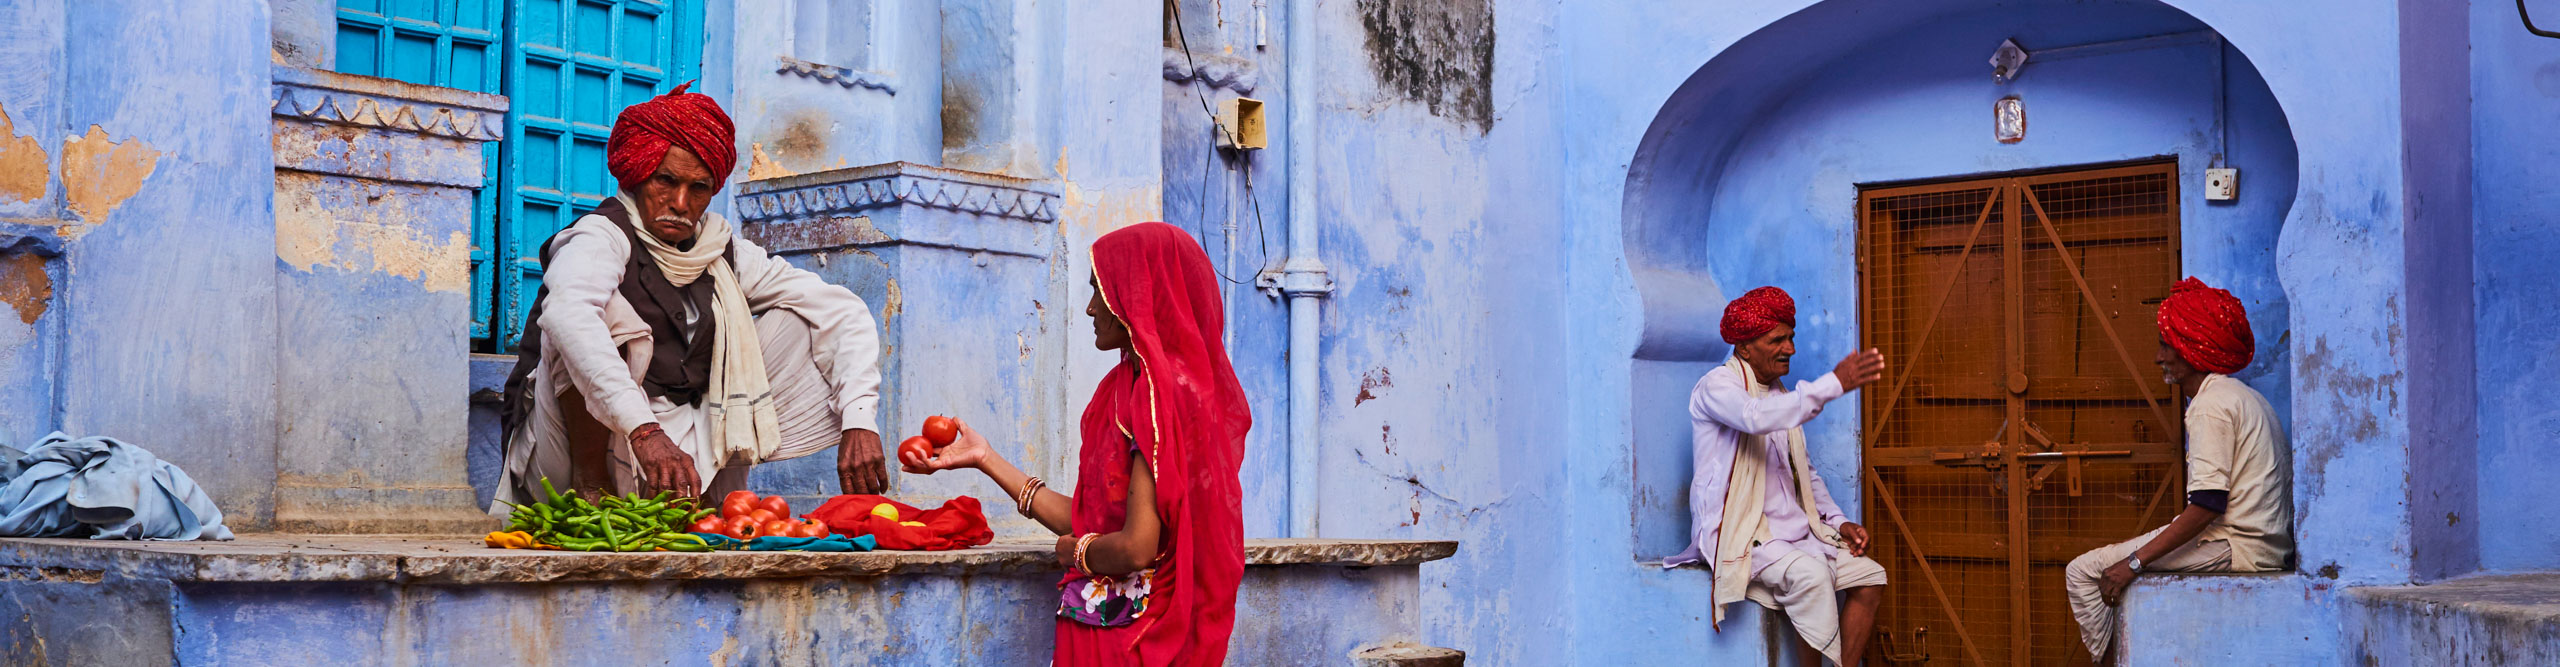 Man in turban selling vegetables to a woman in the blue city of Jodhpur, Rajasthan, India 